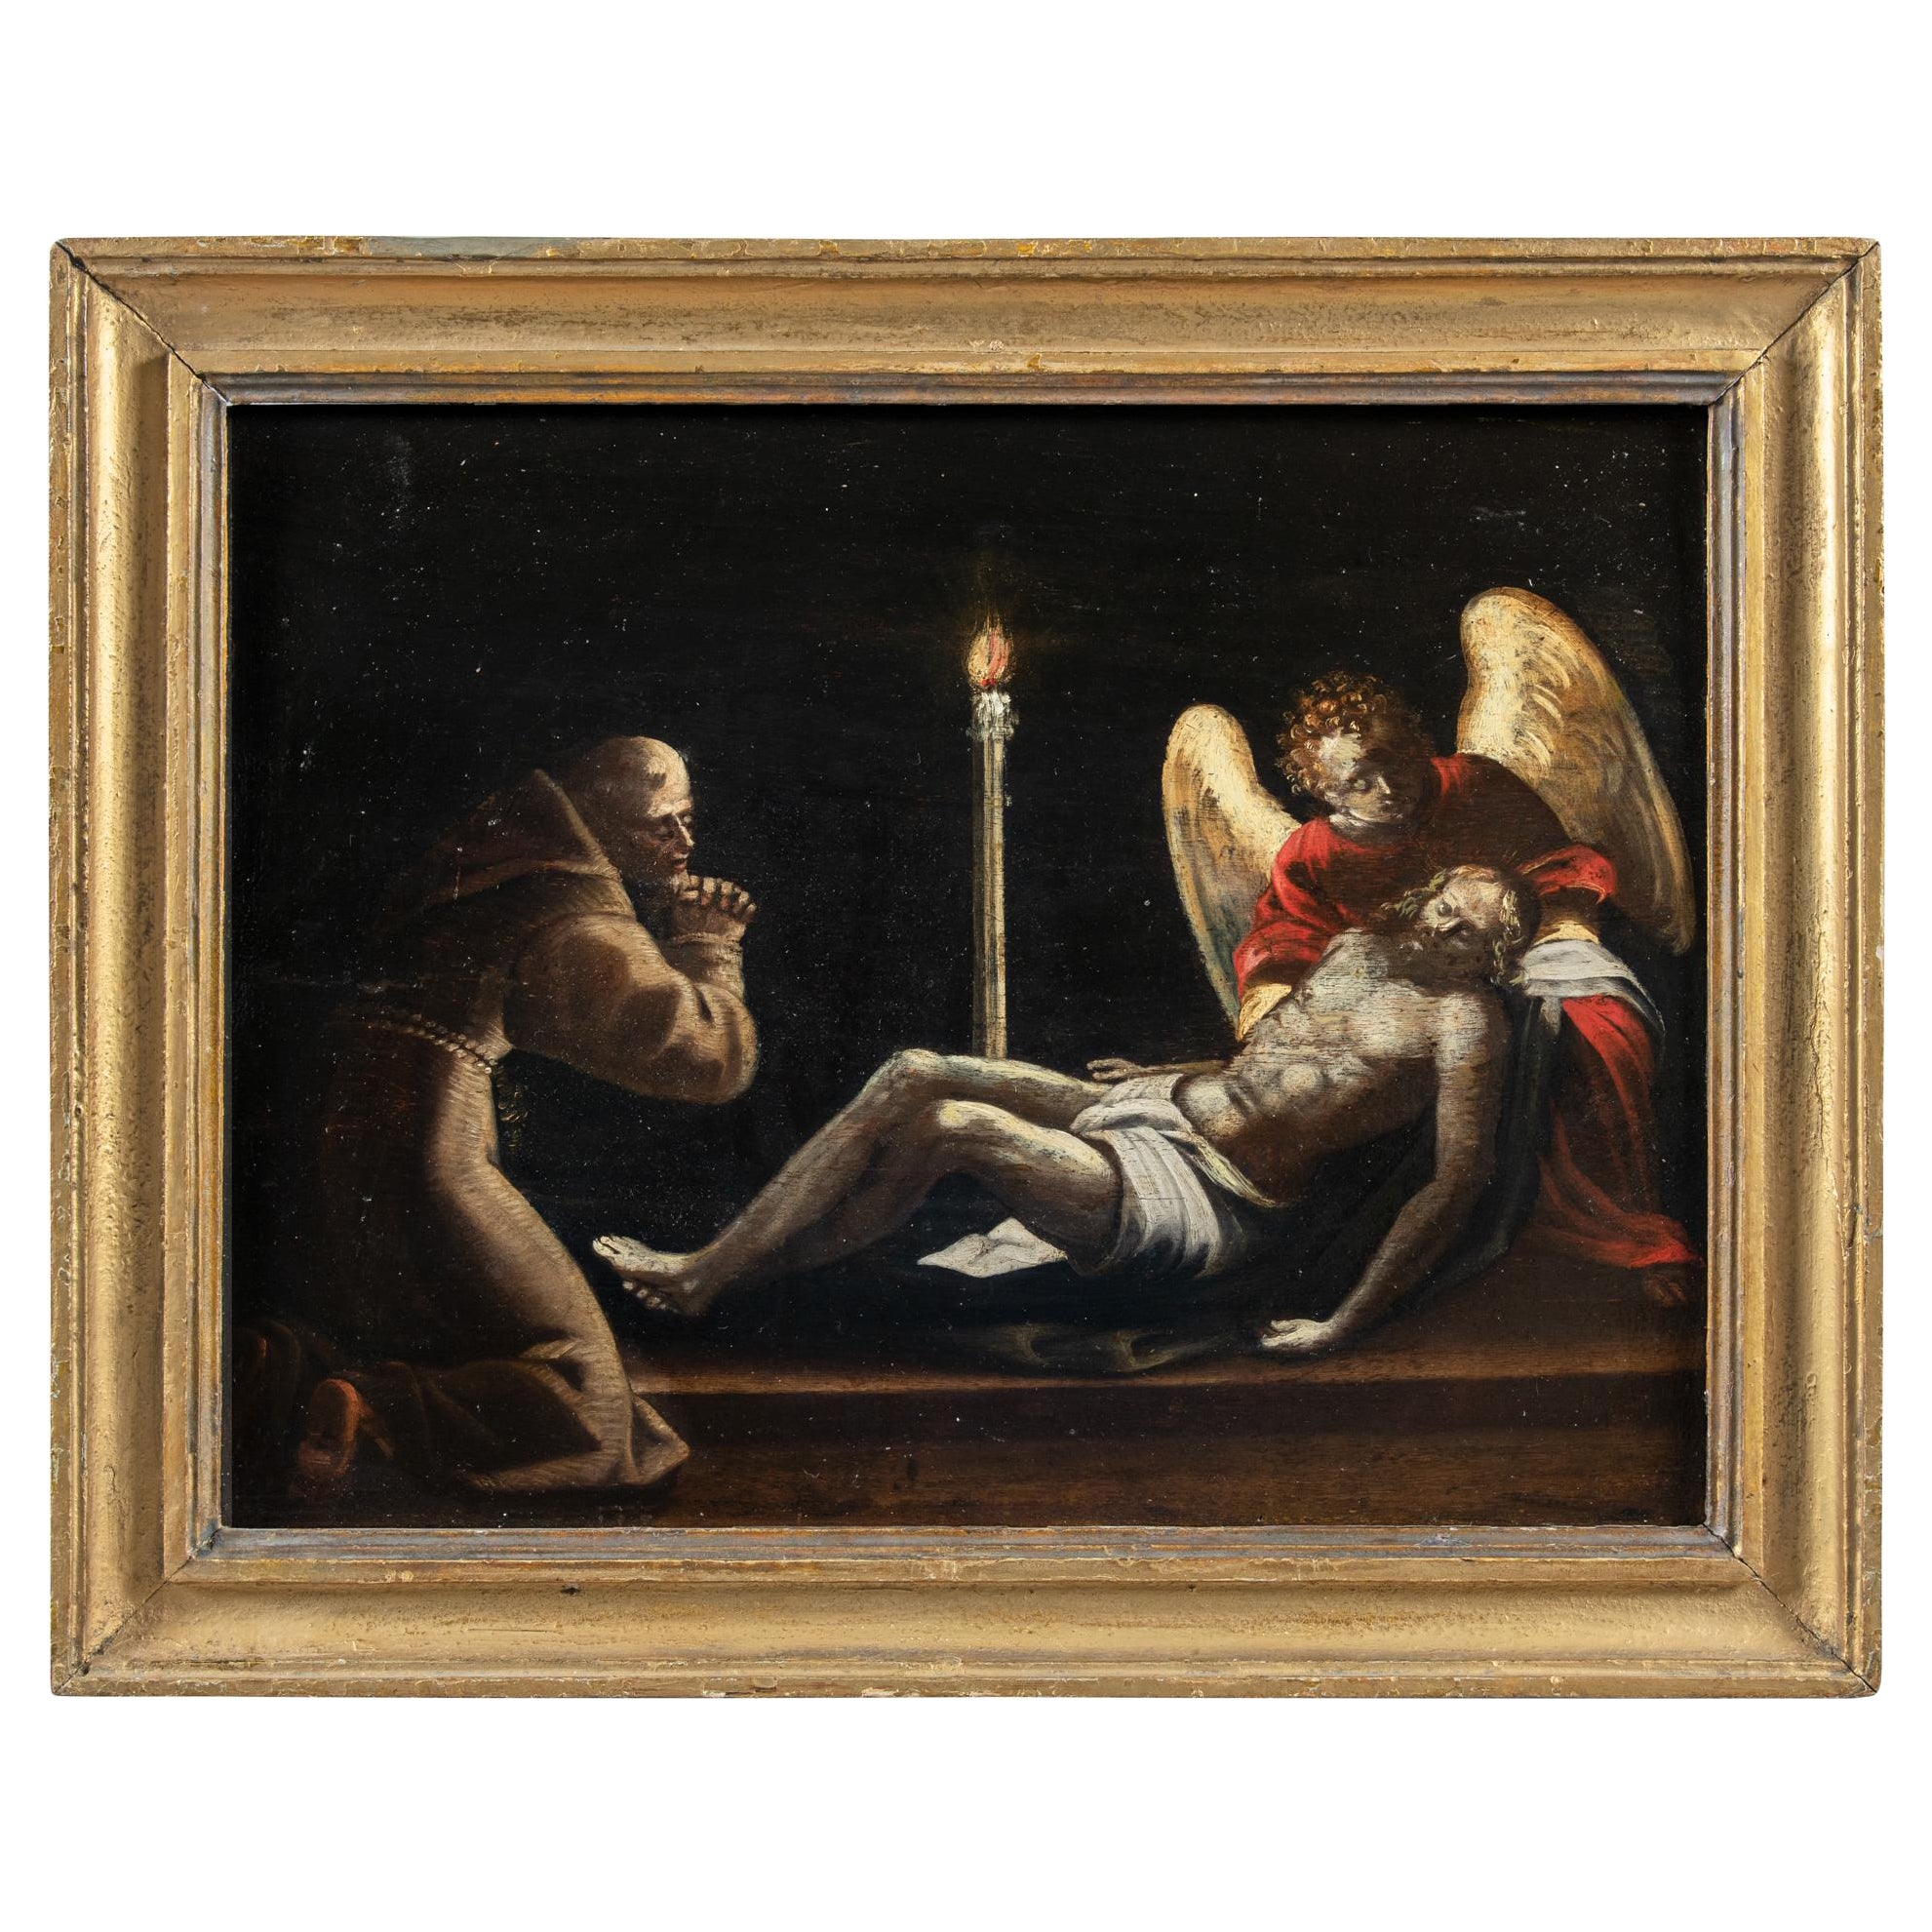 Follower of Fra' Cosmo da Castelfranco (Castelfranco Veneto 1560 - Venice 1620) - Lamentation over Christ.

39 x 53 cm without frame, 49 x 61 cm with frame.

Antique oil painting on panel, in a gilded wooden frame.

- The work takes up the painting